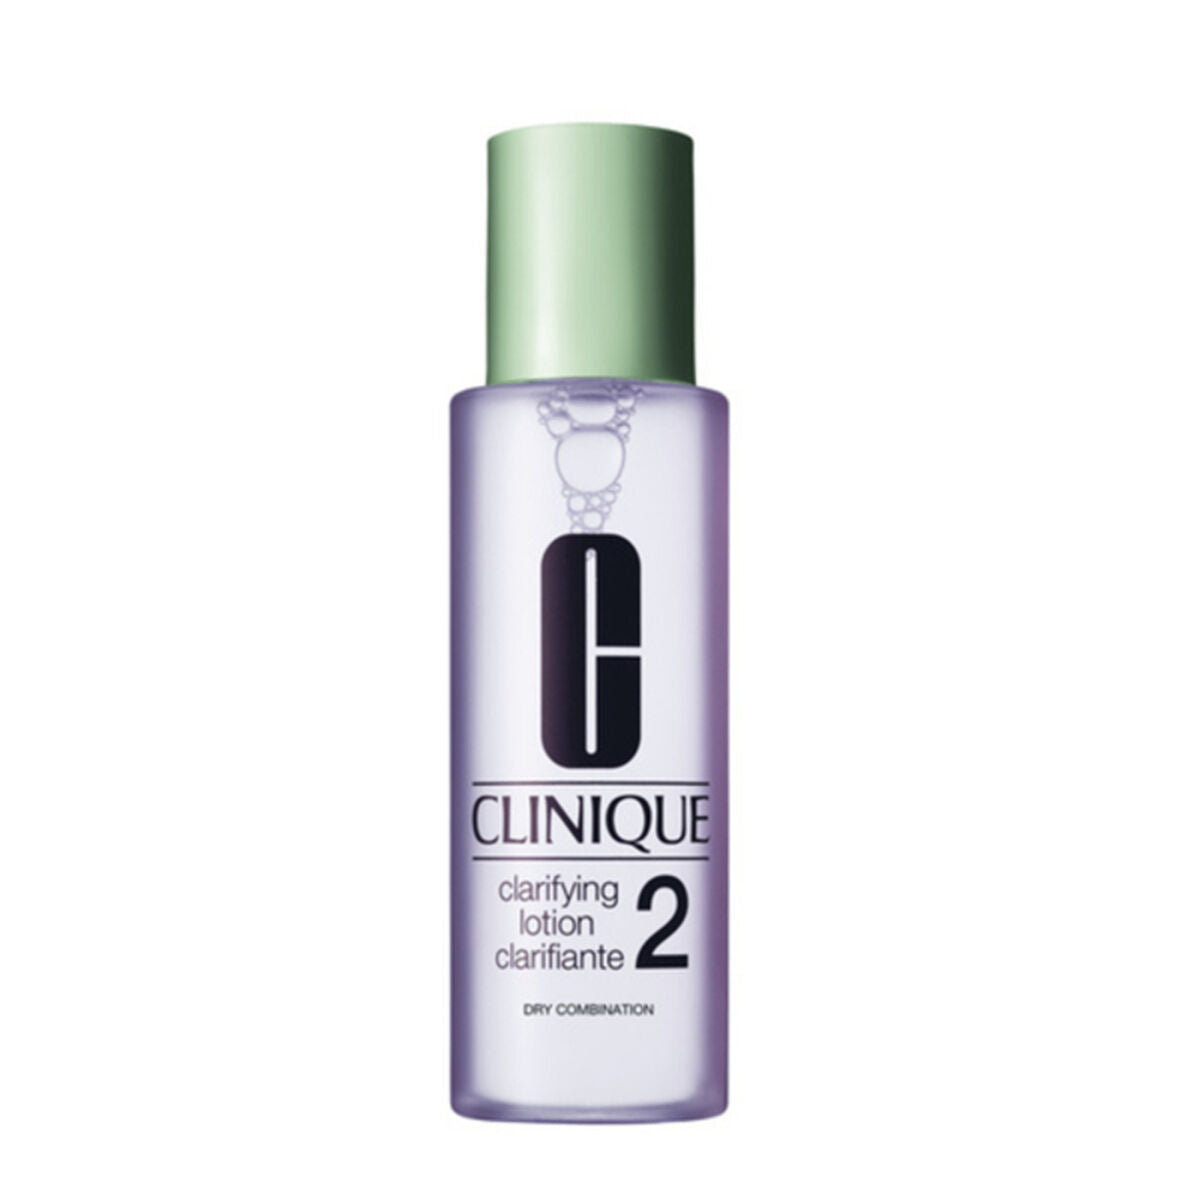 Toning Lotion Clarifying Clinique Combination skin-1